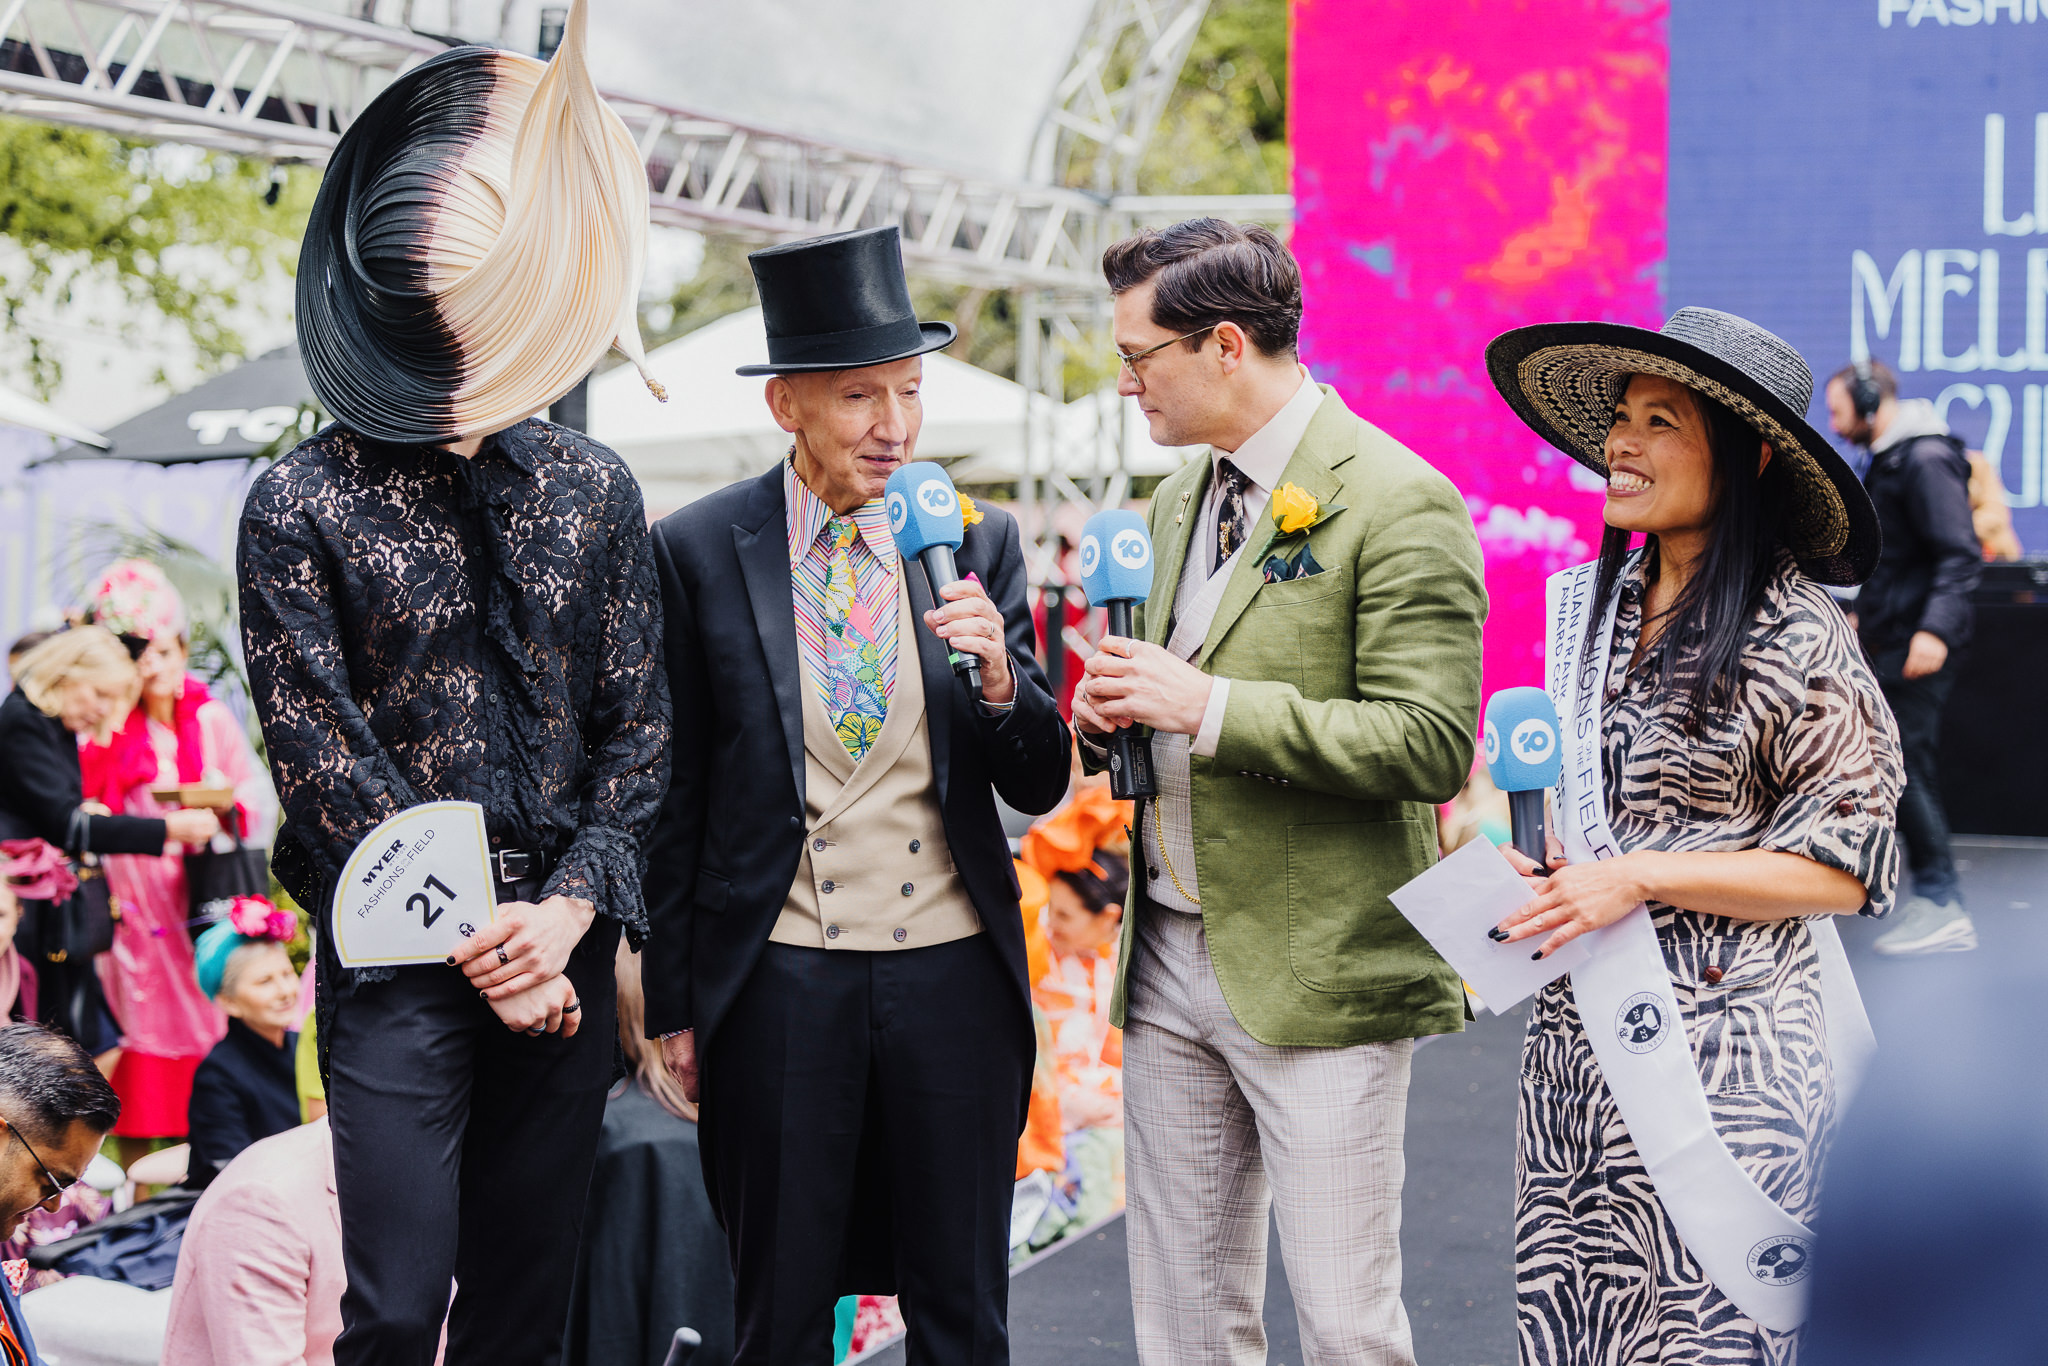 Chanel 10 Interview with Rob Miles, Stephen Jones and Souri Sengdara for the Millinery Award 2022